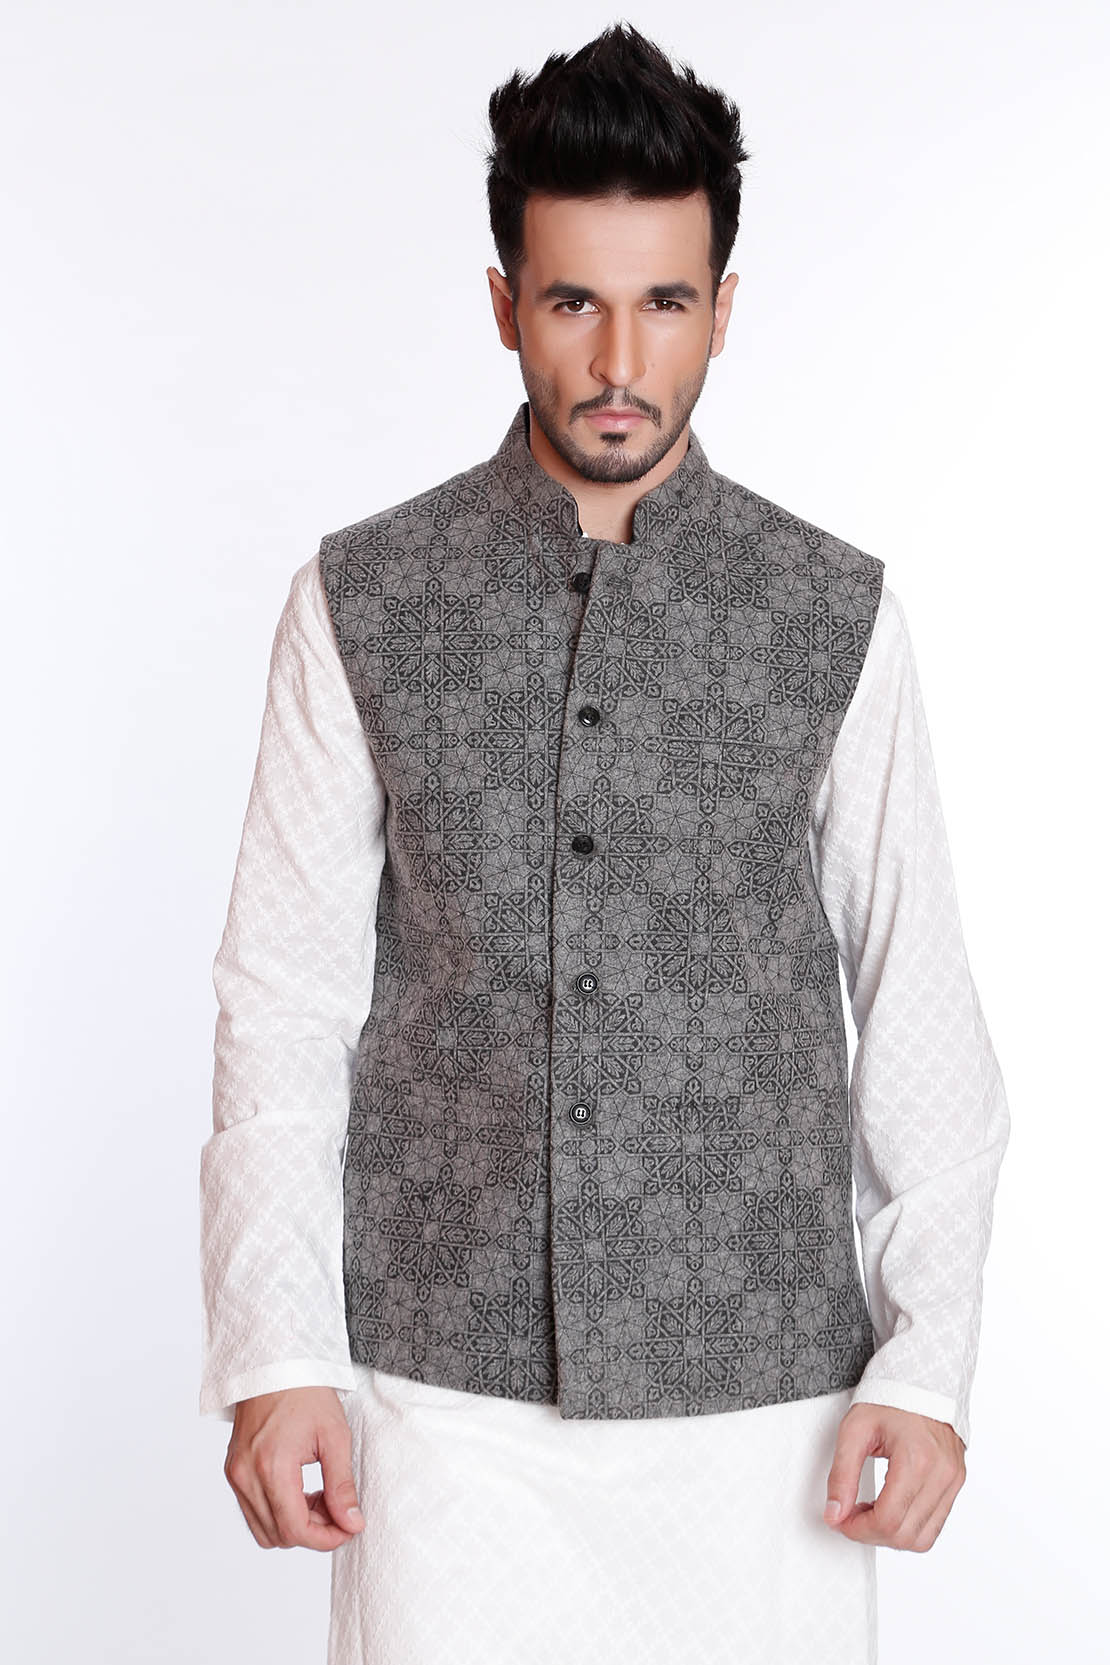 waistcoat-men-by-chinyere-9